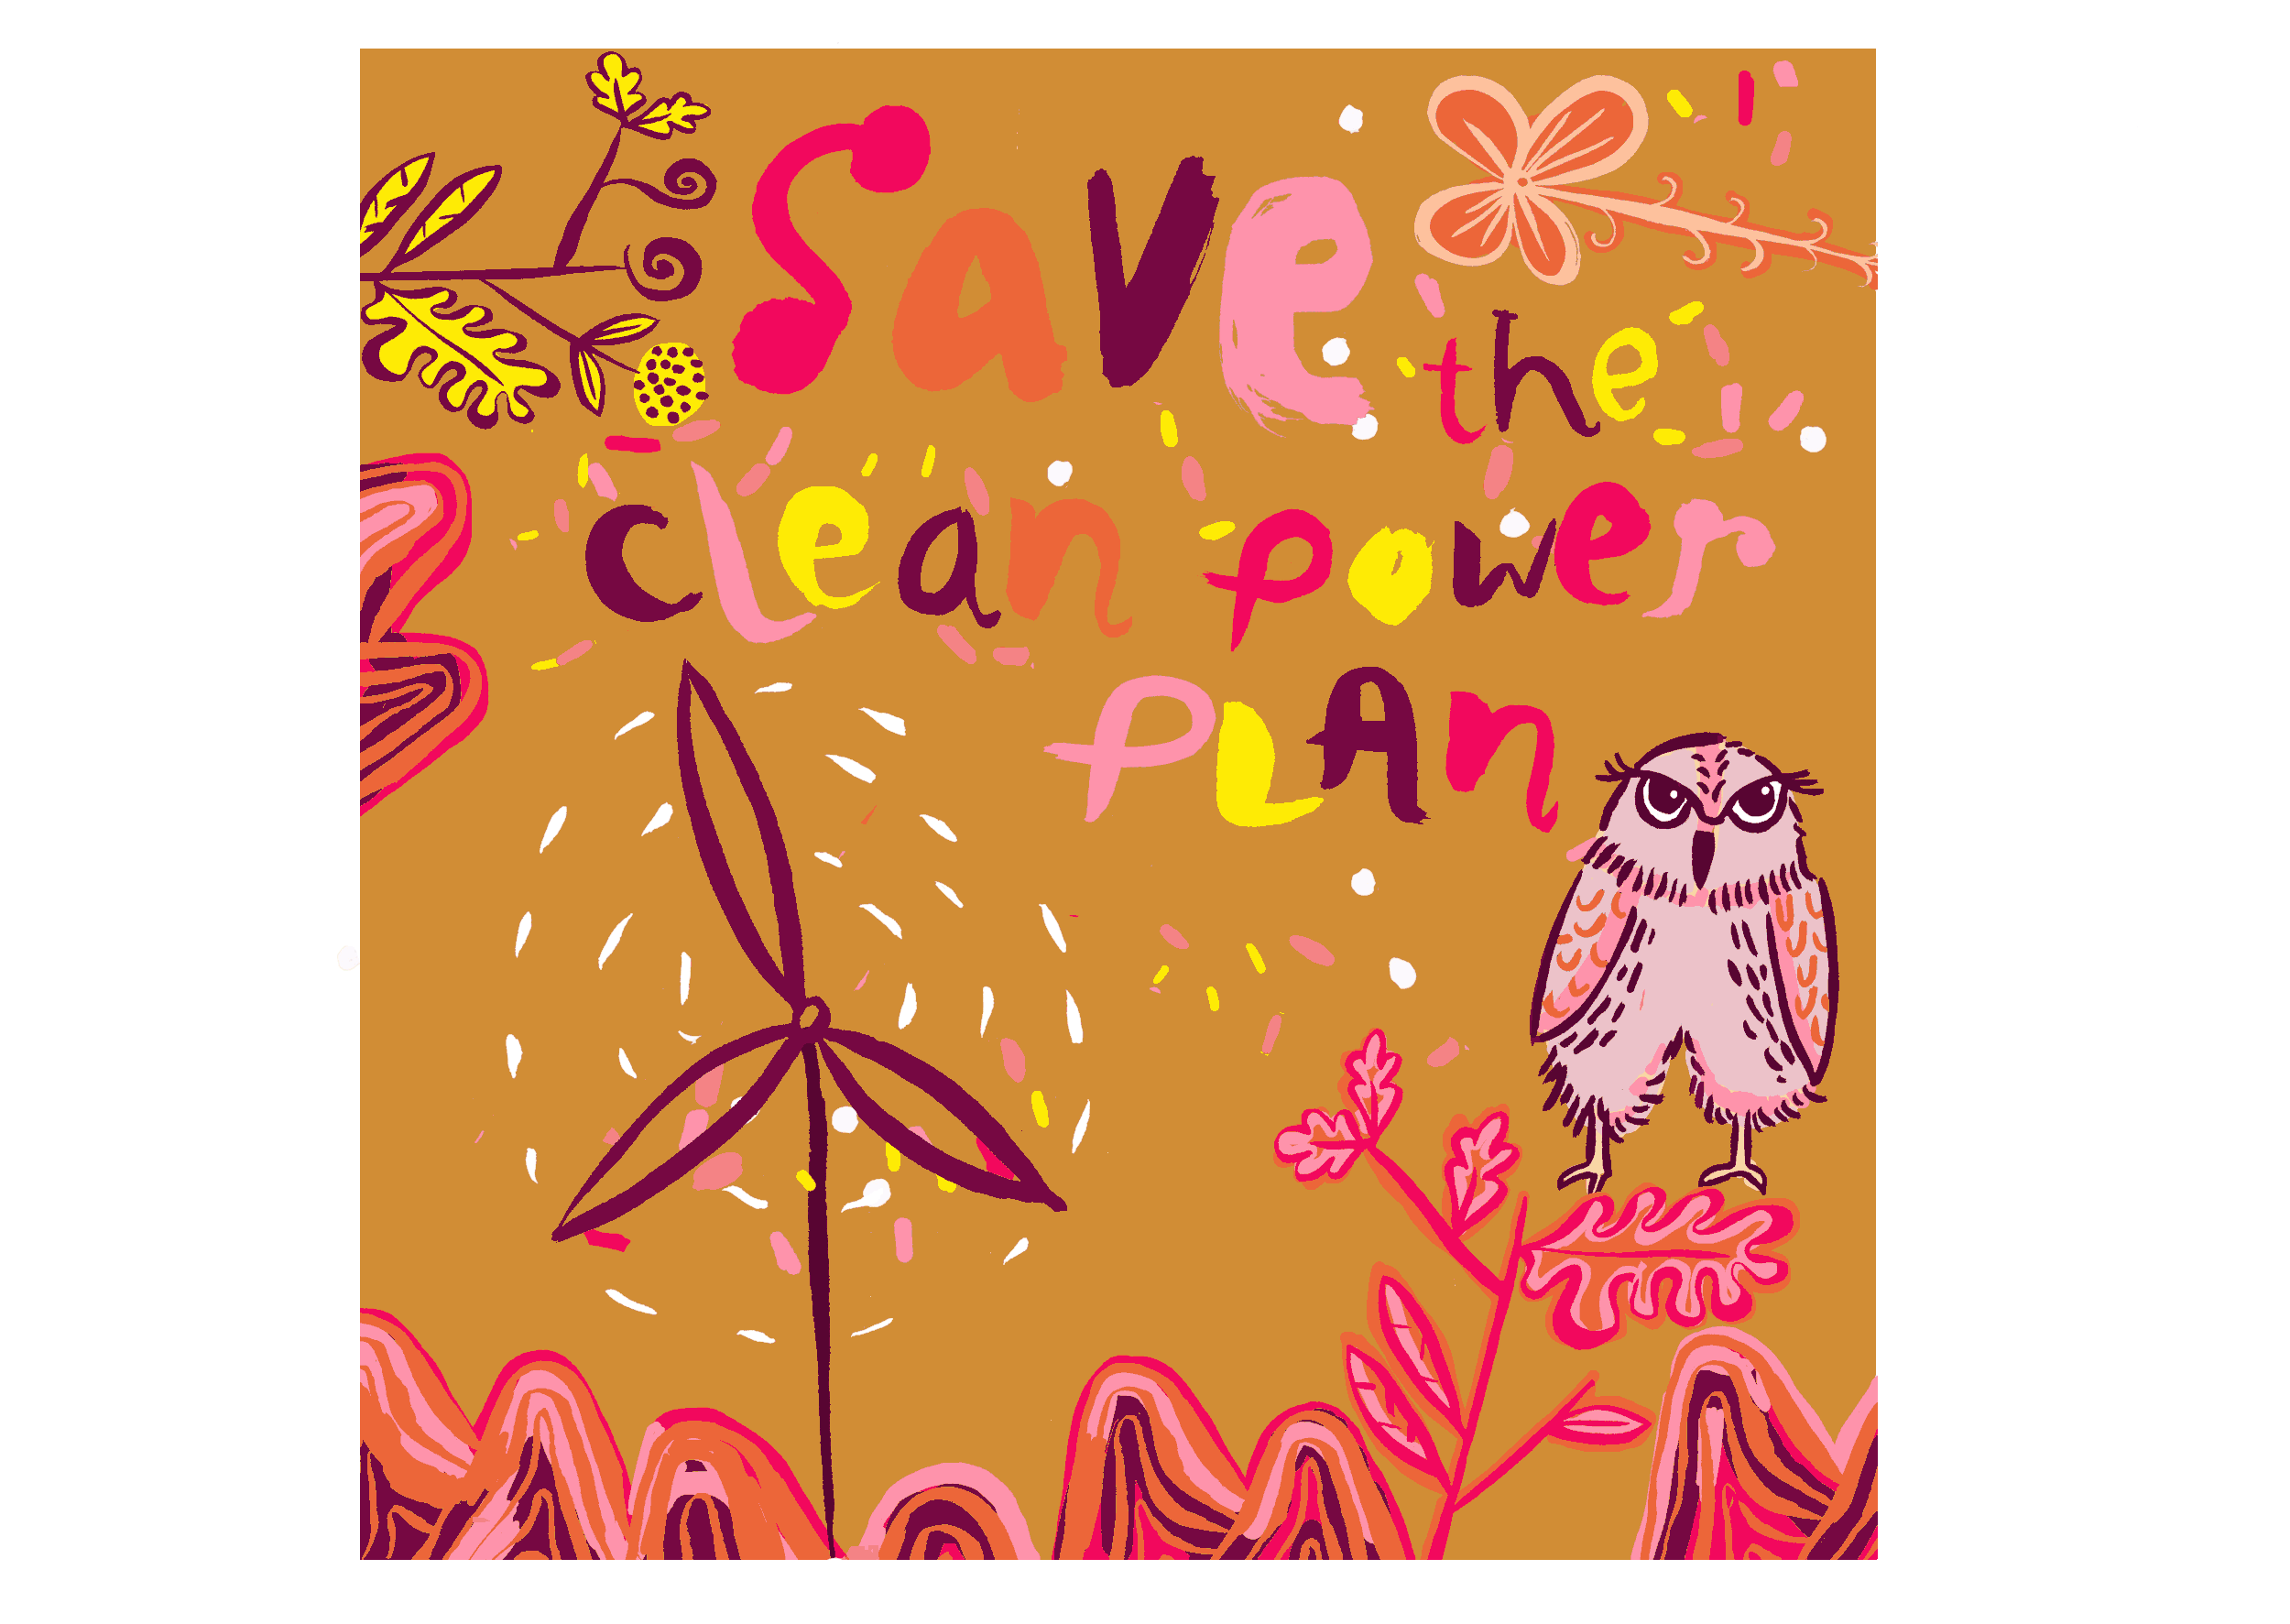 Save the Clean Power Plan